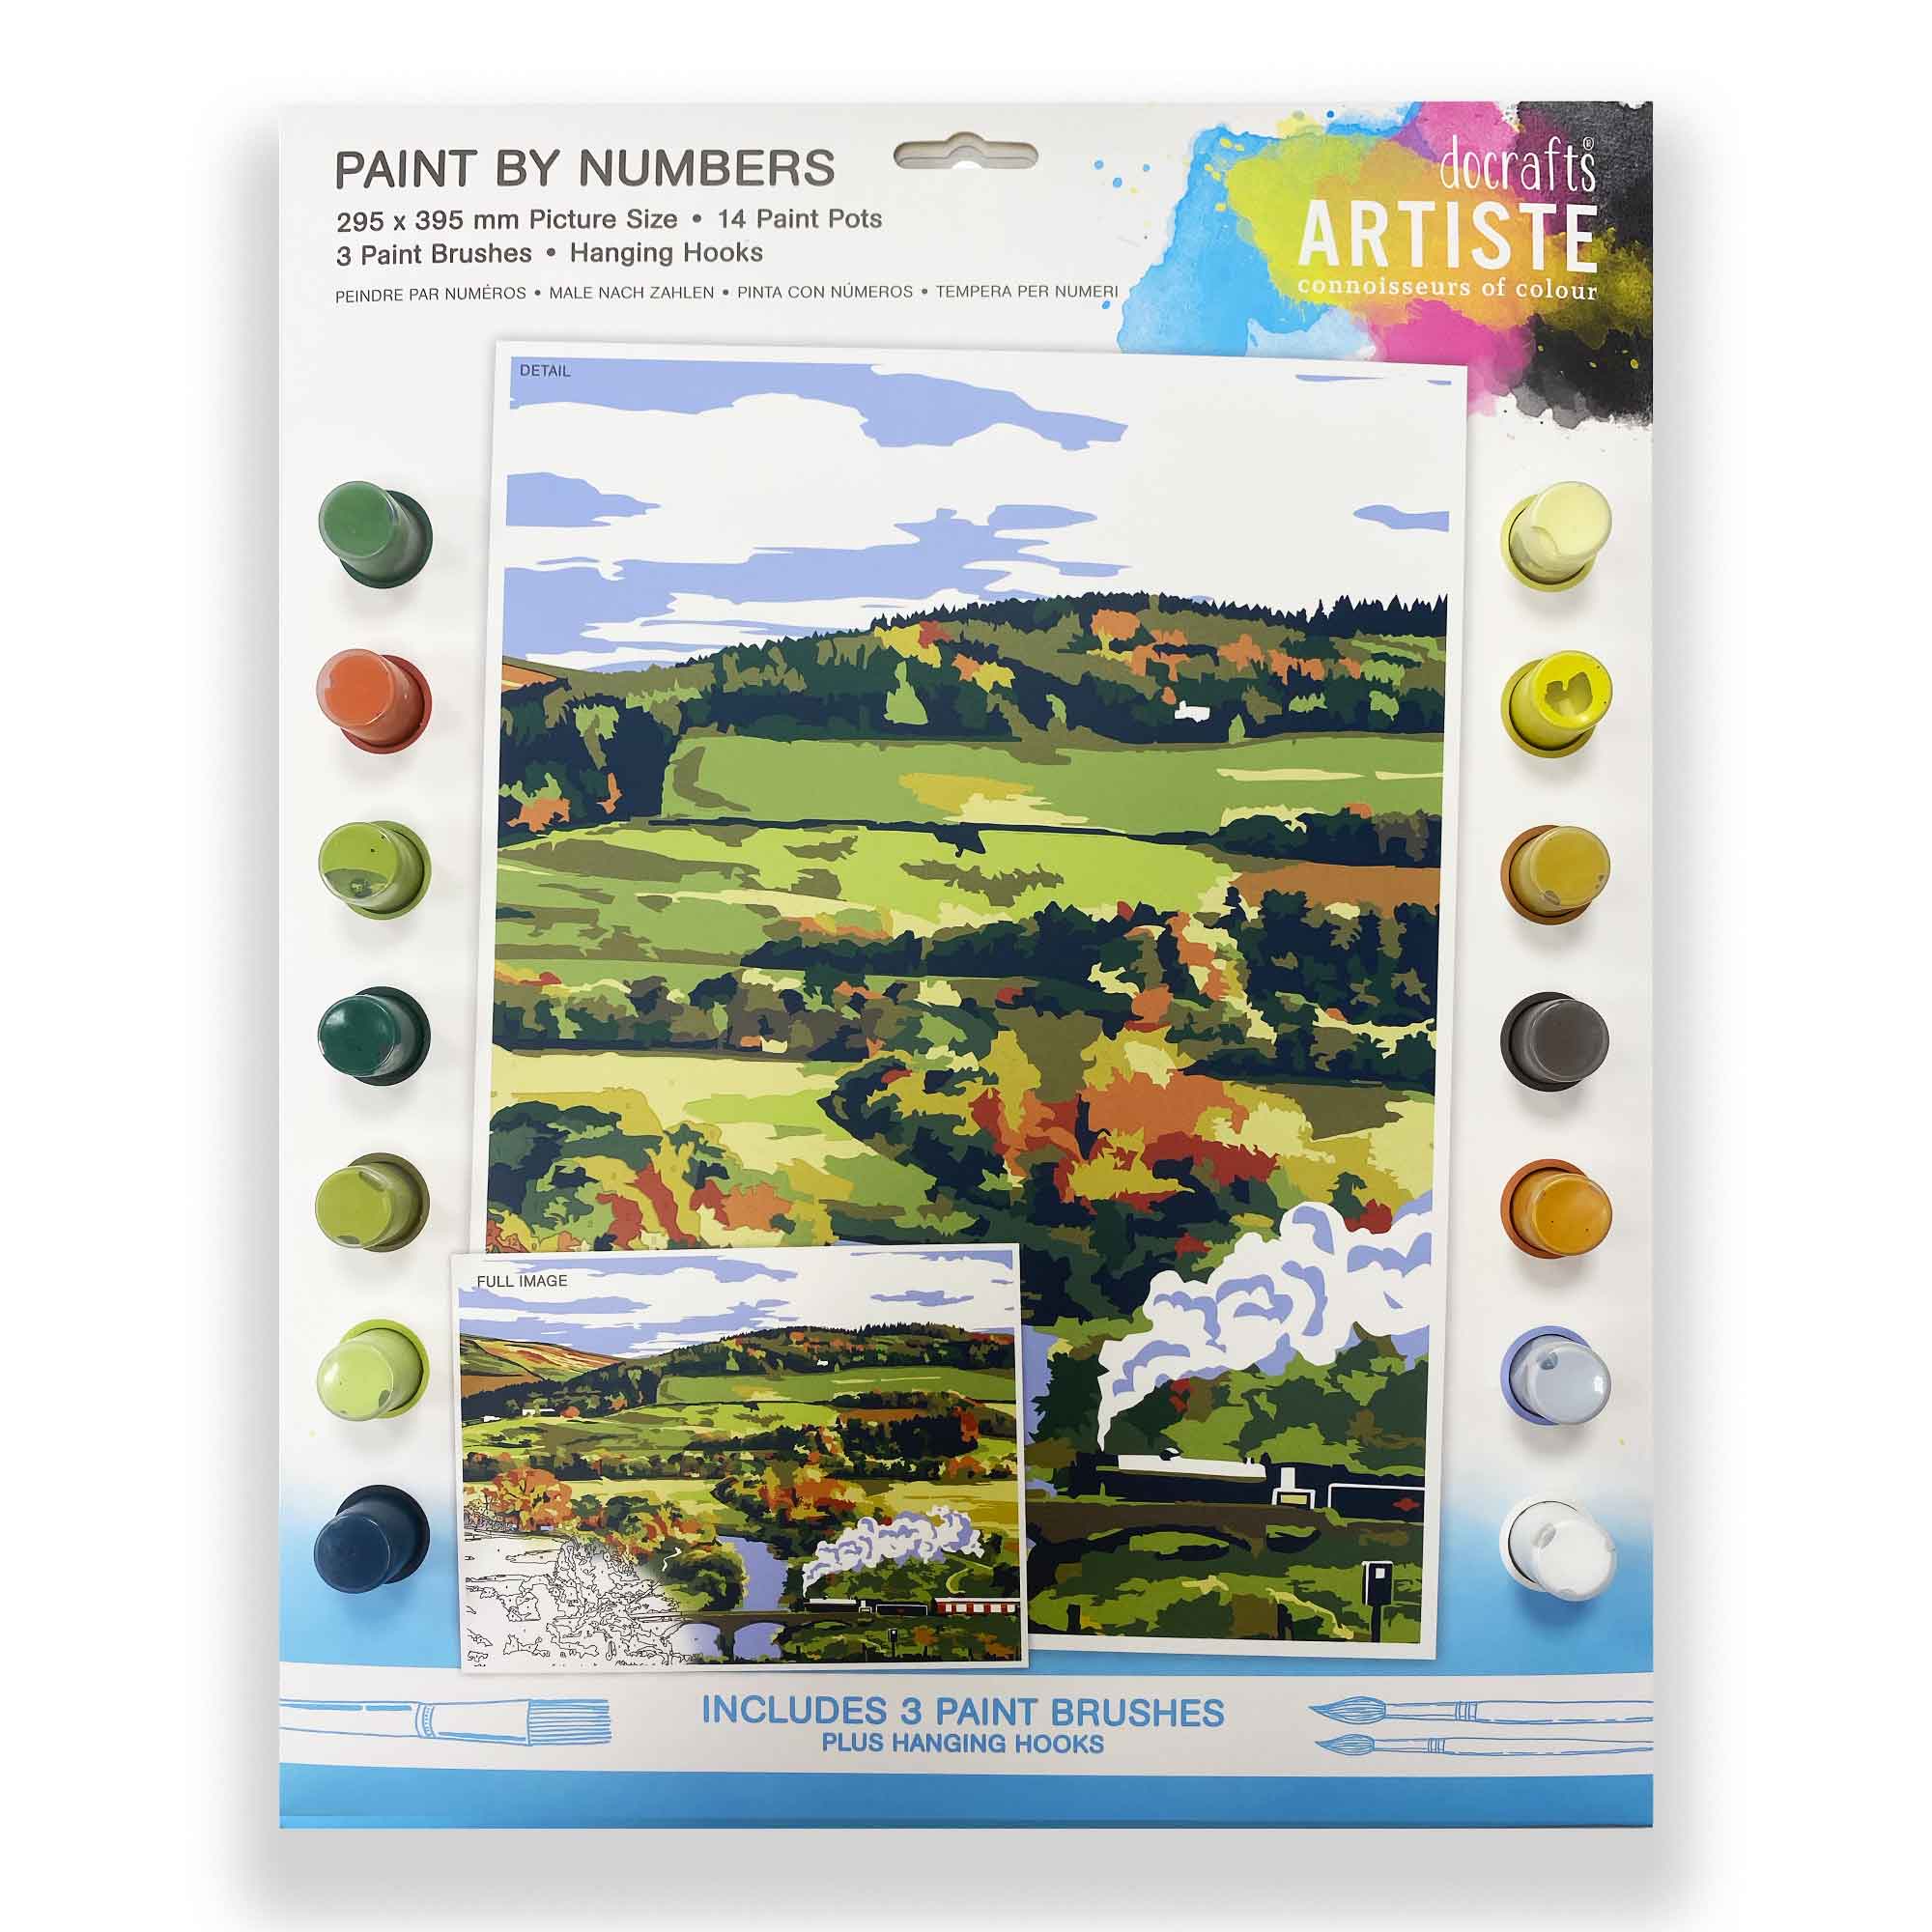 Docrafts Artiste Paint by Numbers (295 x 395mm) Steam Train Landscape